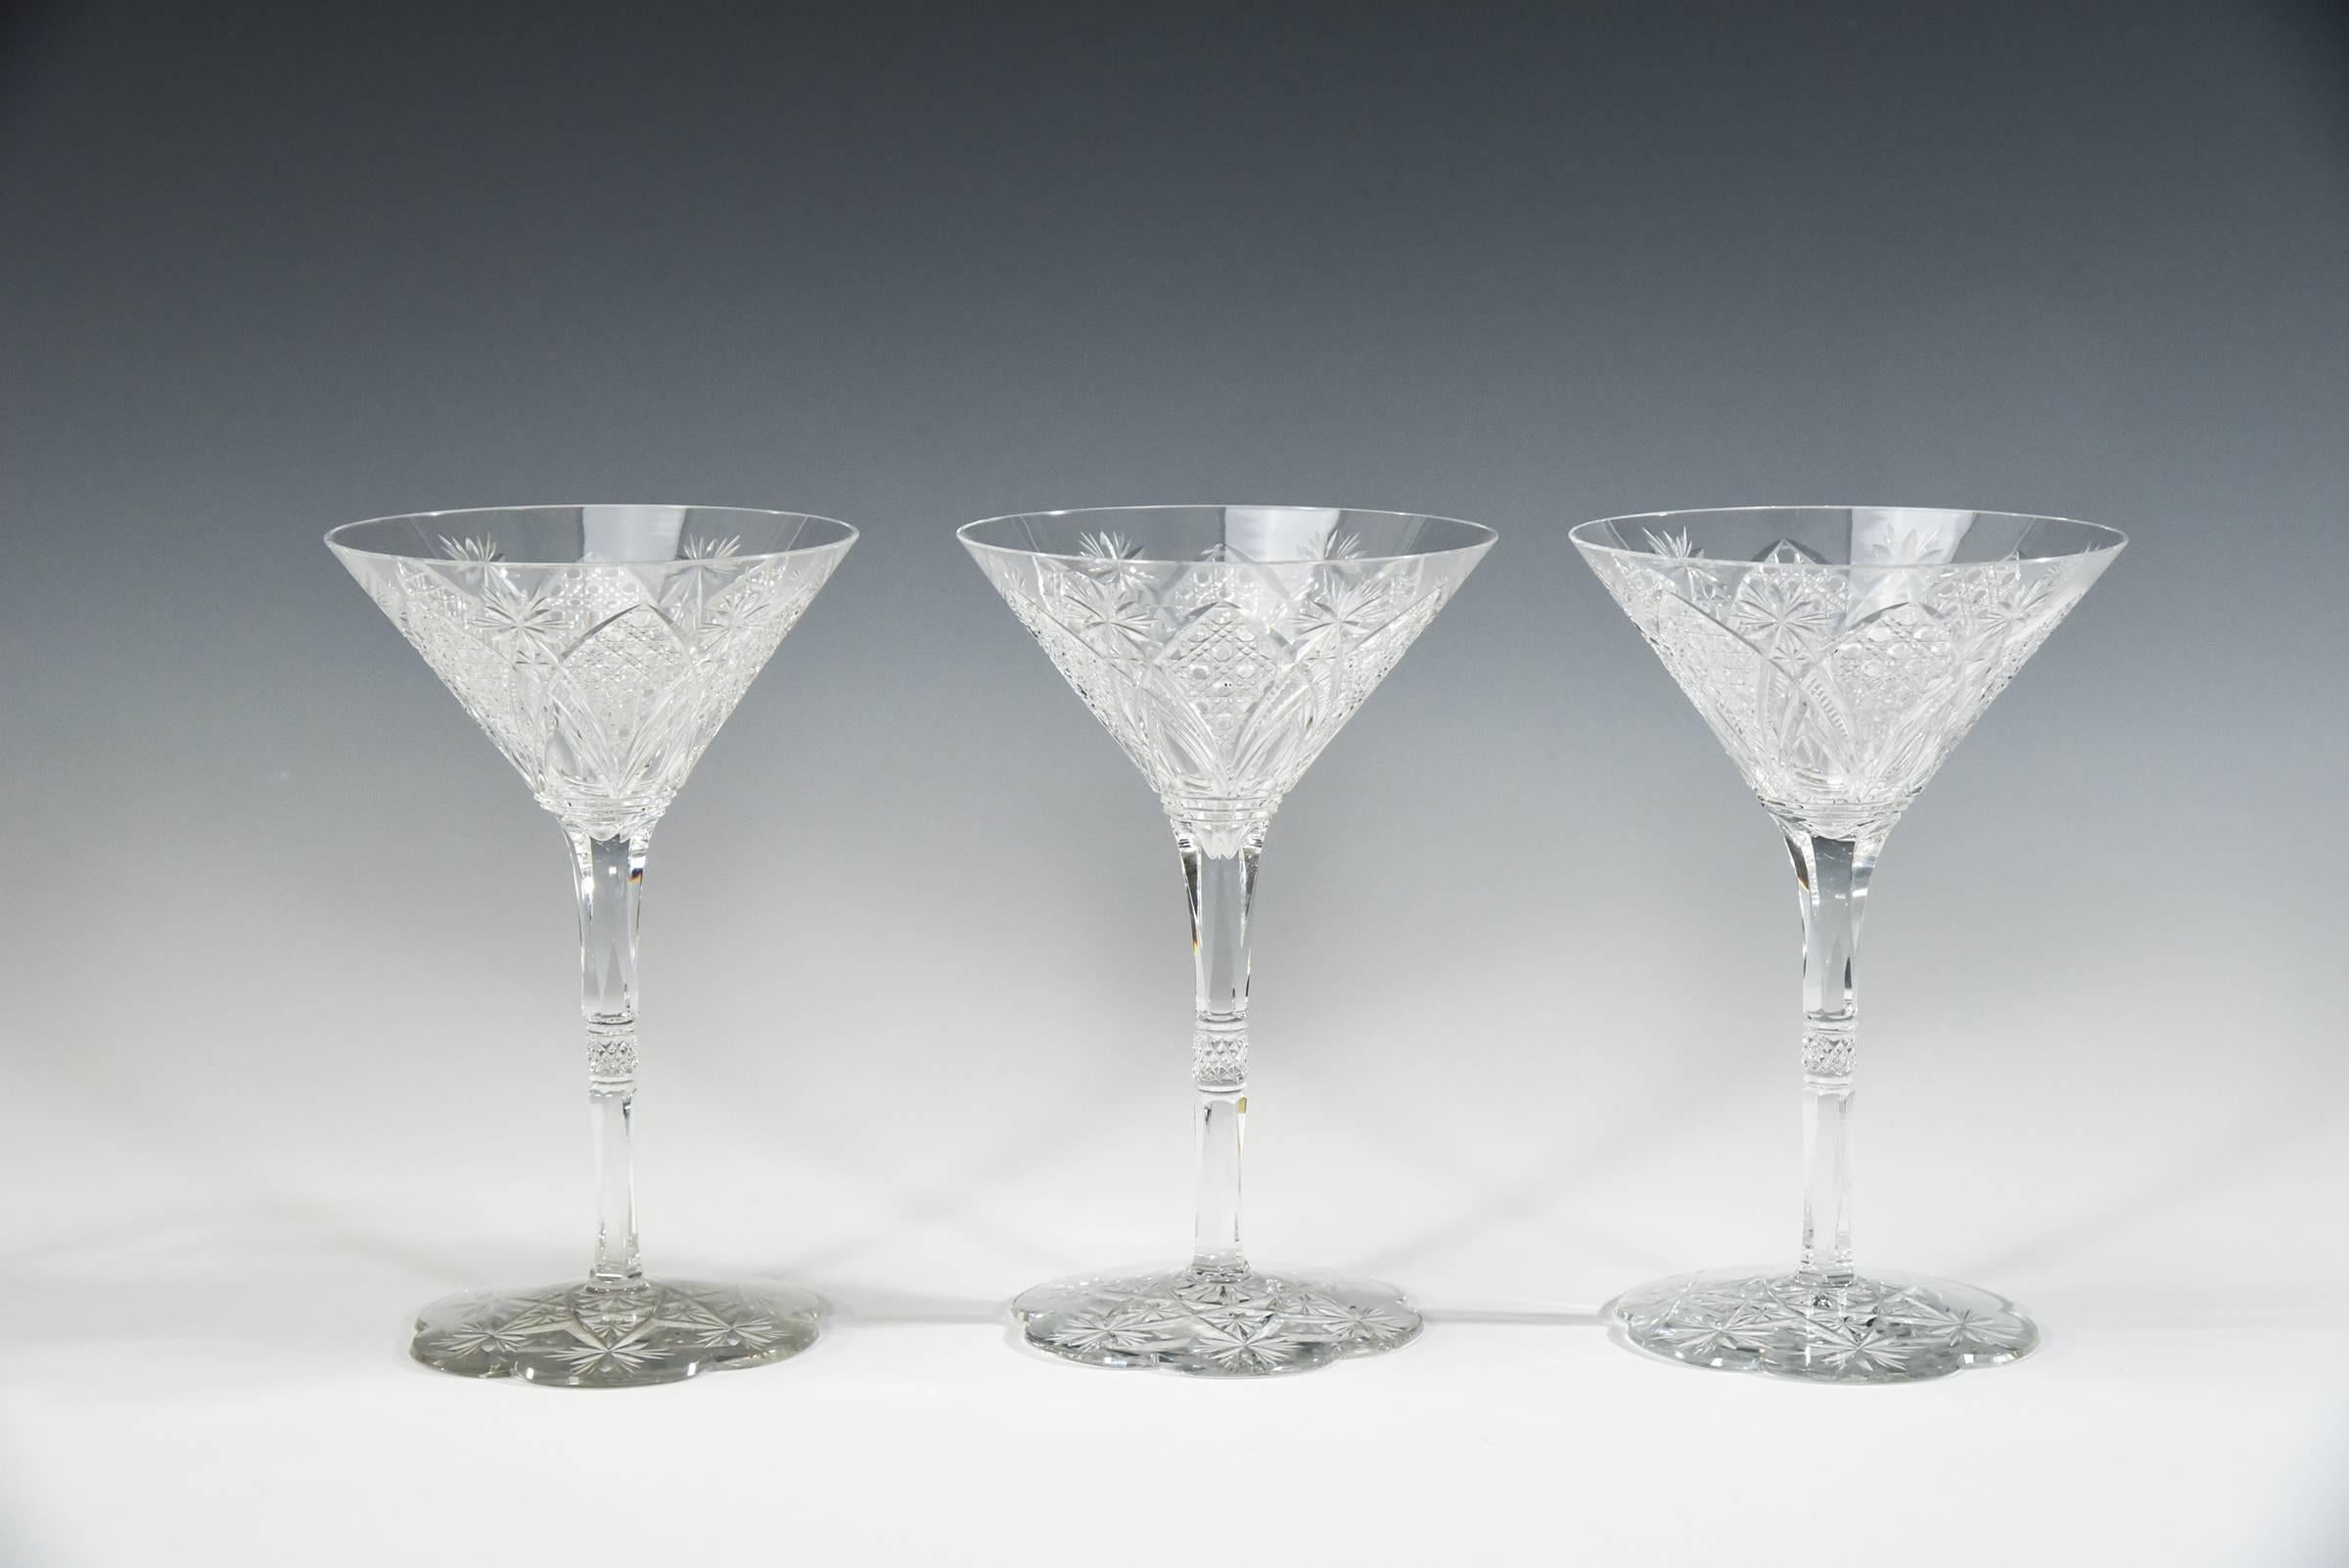 This amazing and rare Baccarat Elbeuf service was first introduced in 1908 and presented at the International Exhibition in Nancy, France in 1909. Specially ordered in 1920 by the Maharaja of Baroda, these are truly fit for a King!
The set of 12